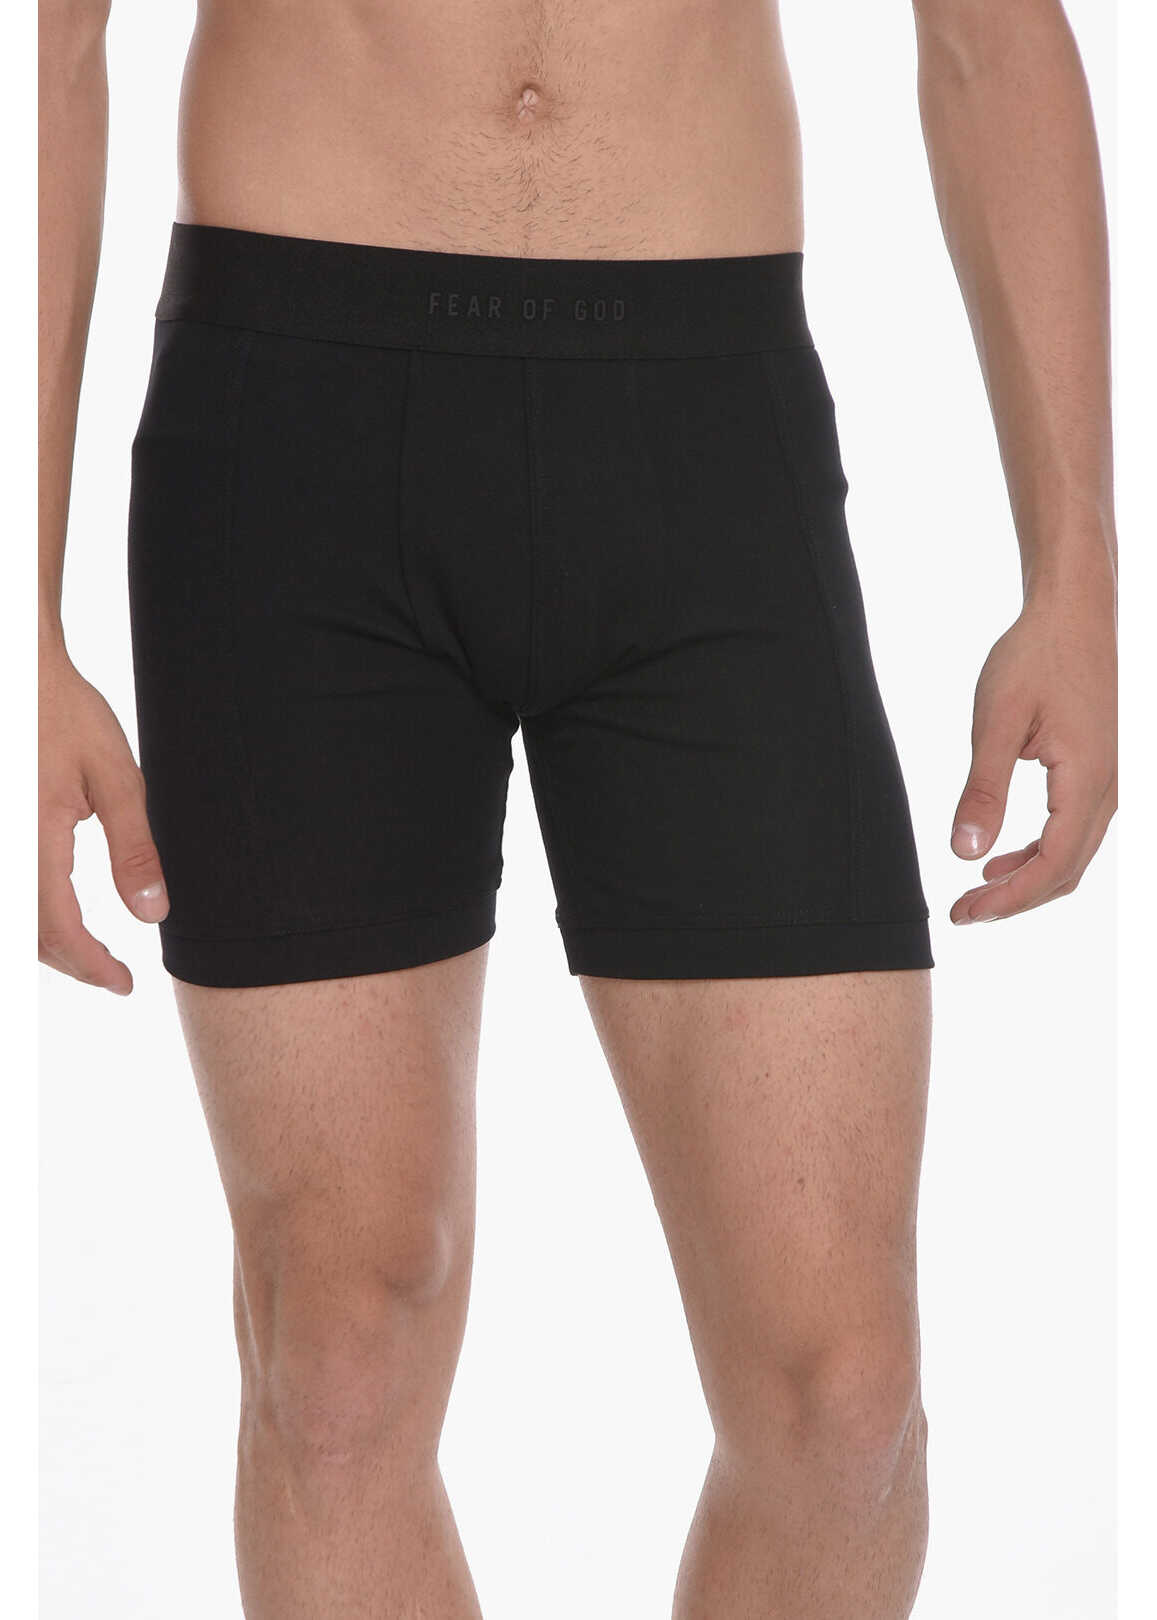 FEAR OF GOD Cotton Stretch Solid Color 2 Pairs Of Boxers Set Black